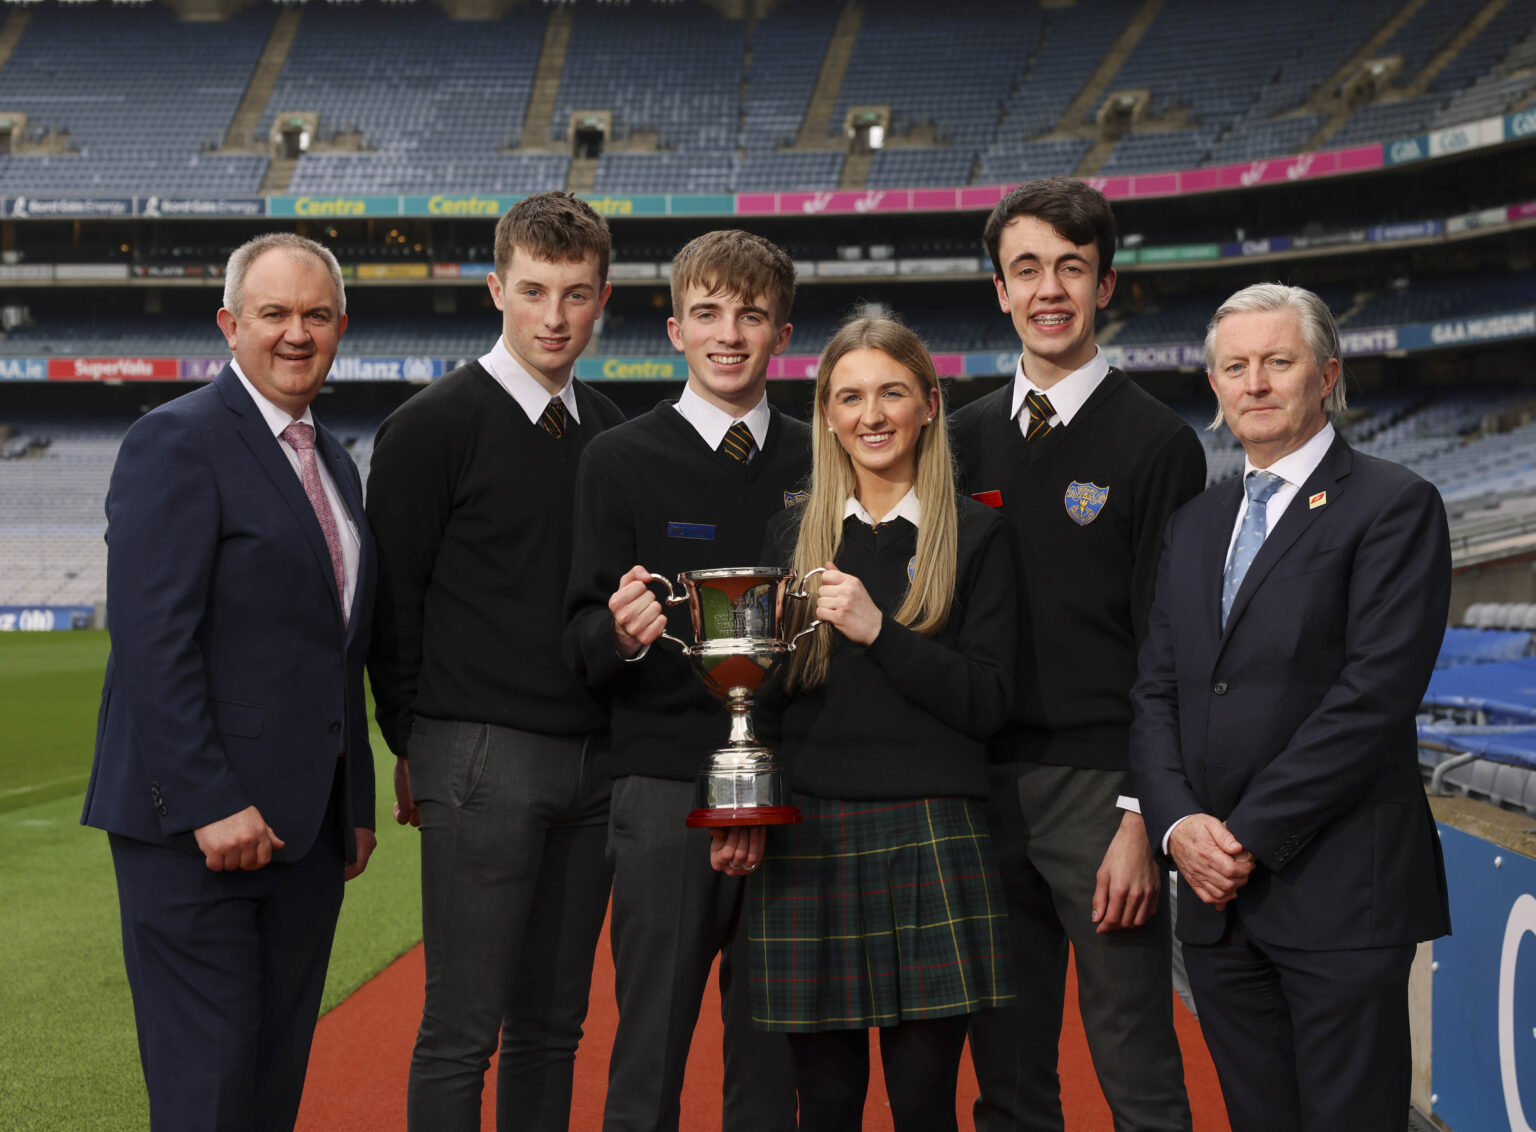 Pictured are students, Oisin Colleran, and Cormac Delaney, Amy Higgins and Peter O’Neill, from Holy Rosary College, Mountbellew who were announced as the overall winners of the 2023 Certified Irish Angus School’s Competition sponsored by ABP and Kepak at an awards ceremony in Croke Park.  The four students secured the win after impressing the judges with their research project which focussed on “Improving Quality of Beef for Consumers” for the prestigious cattle-rearing competition, now celebrating its ninth year.  Photo Chris Bellew / Fennell Photography